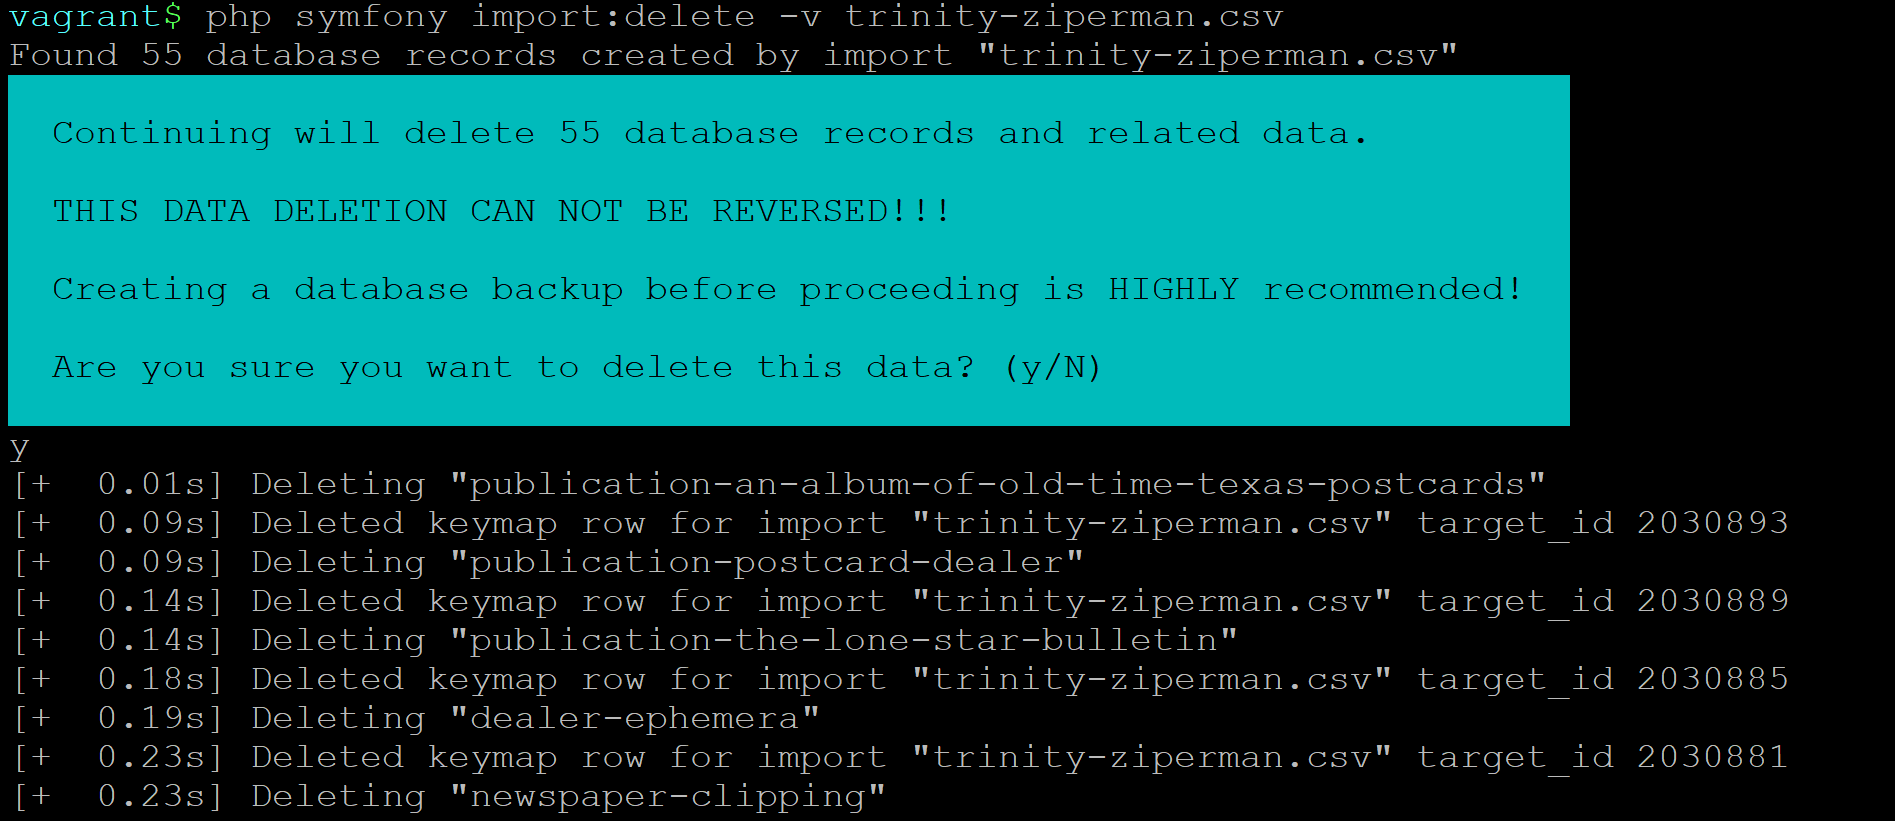 An image of the confirmation message shown when running the import:delete command-line task